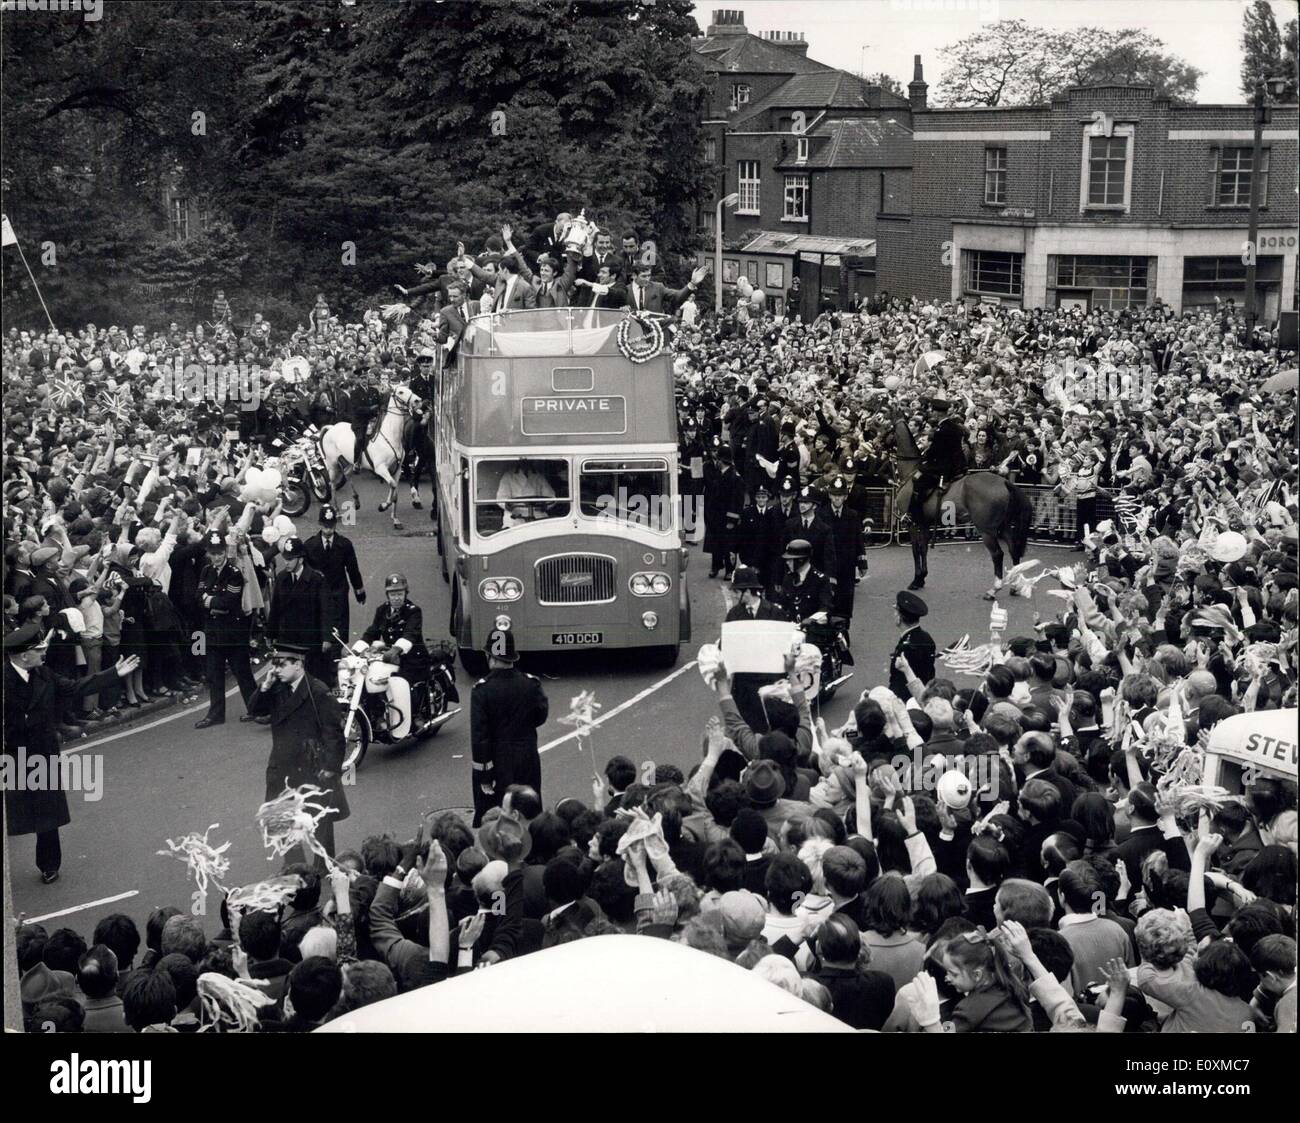 may-21-1967-the-triumphant-fa-cup-winner-take-part-in-a-victory-drive-E0XMC7.jpg